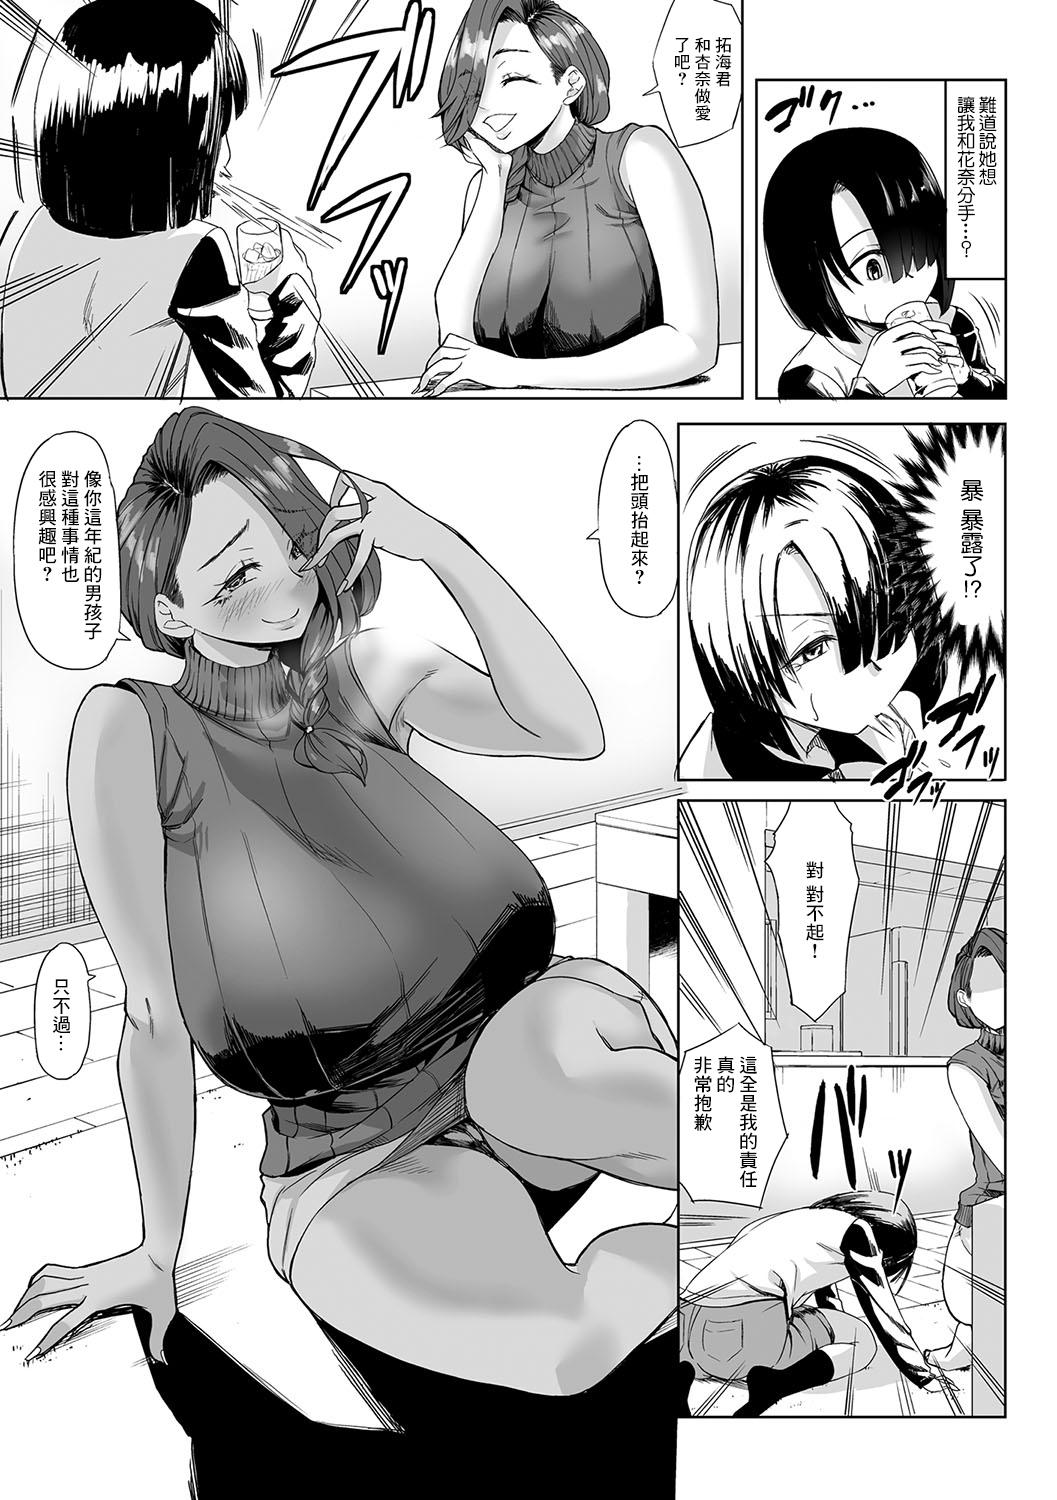 Older Aカップの彼女よりJカップの黒ギャルの方が良いよね After Nudes - Page 4